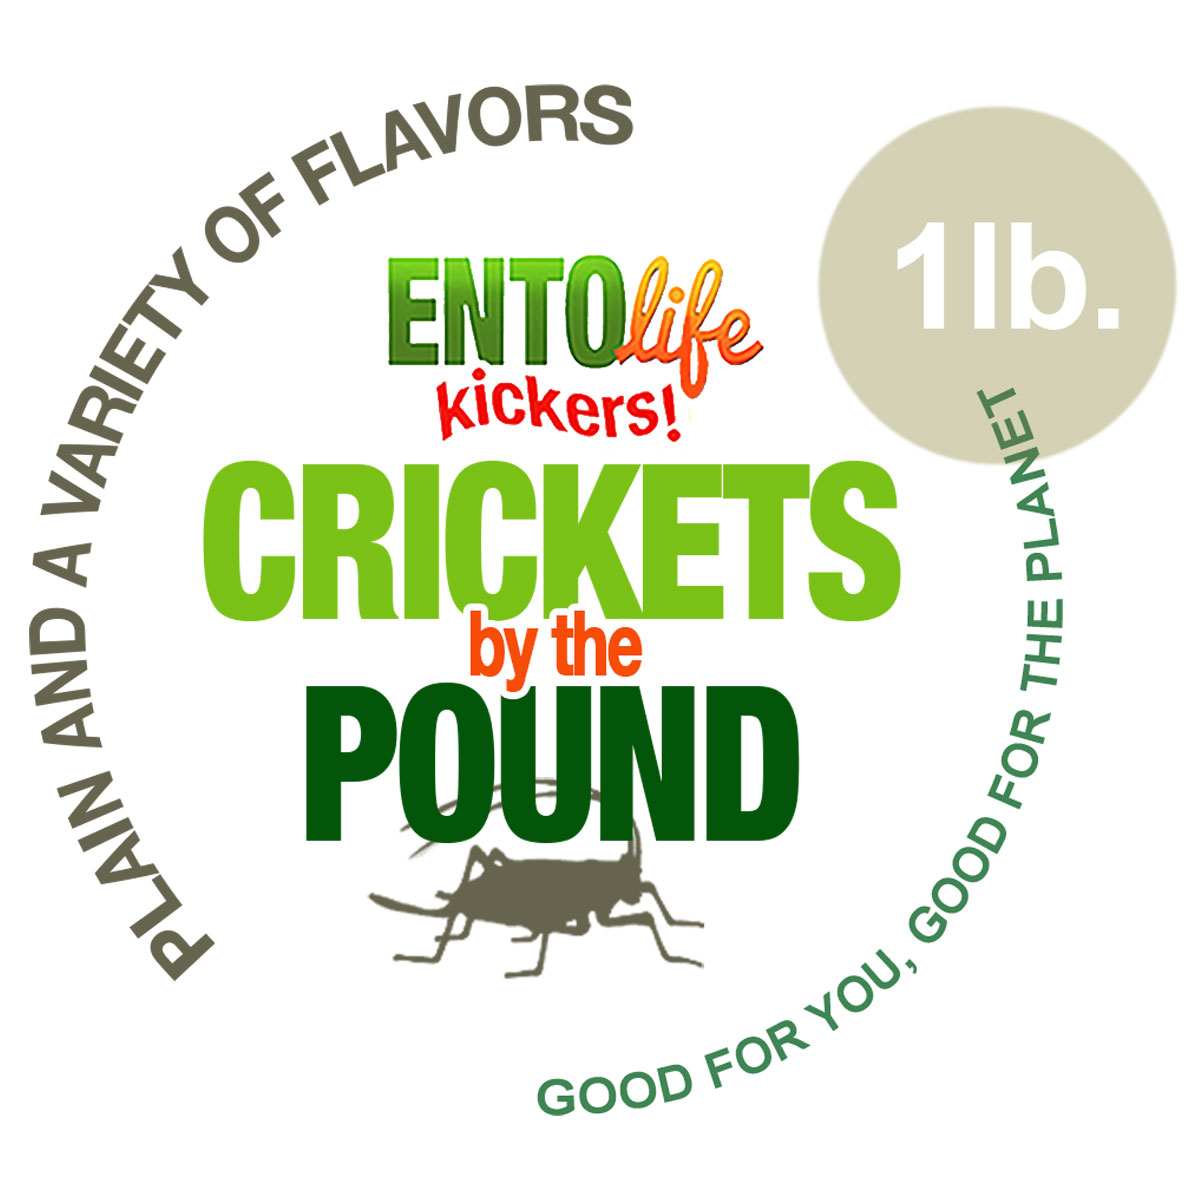 crickets-by-the-pound-logo/